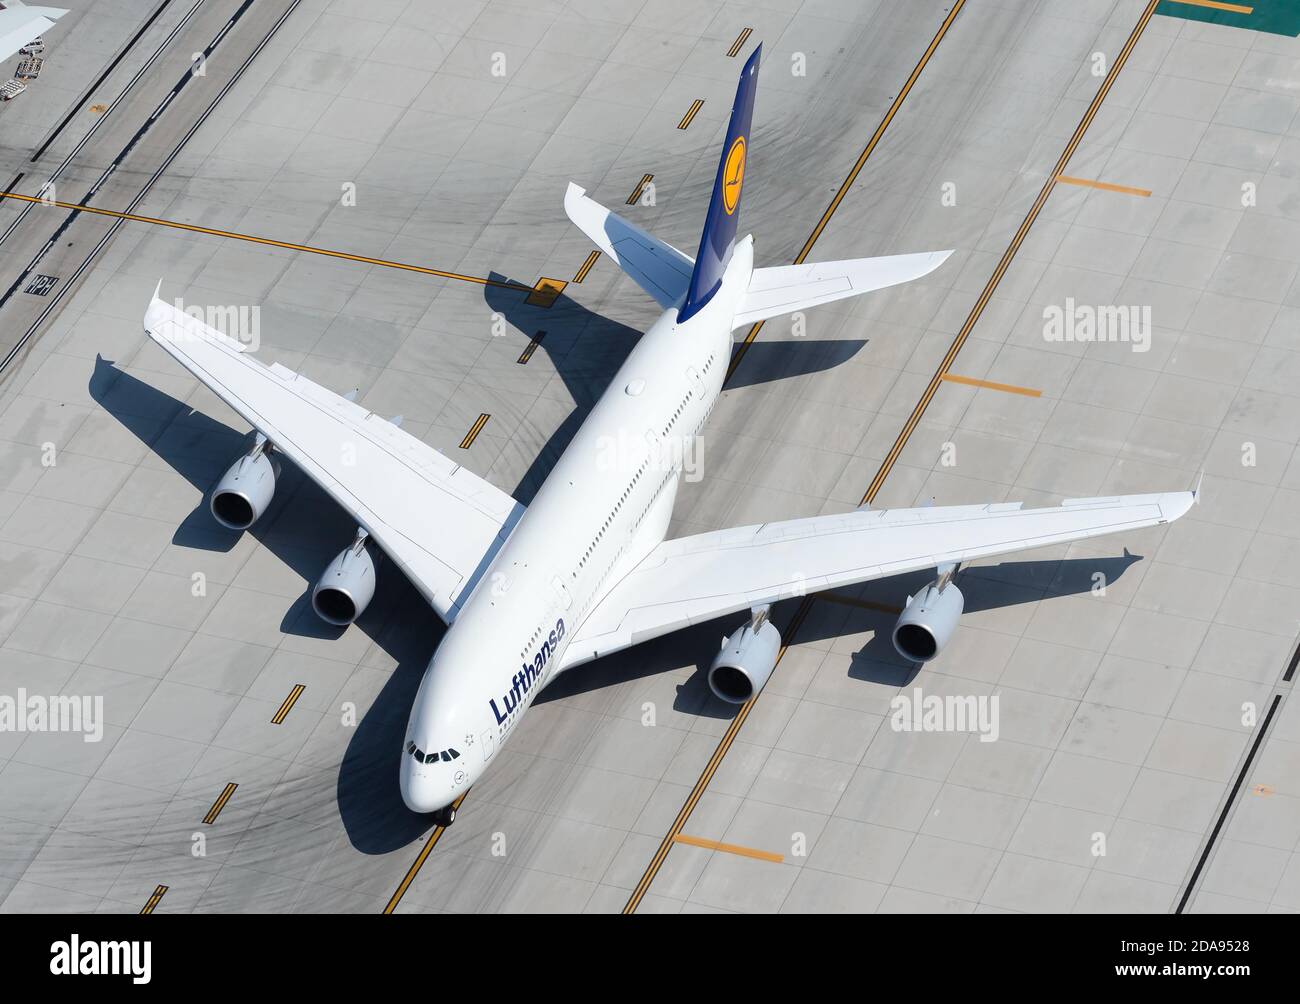 Lufthansa Airbus A380 aircraft taxiing over taxiway lines. A380-800 aeroplane of German airline aerial view. Stock Photo